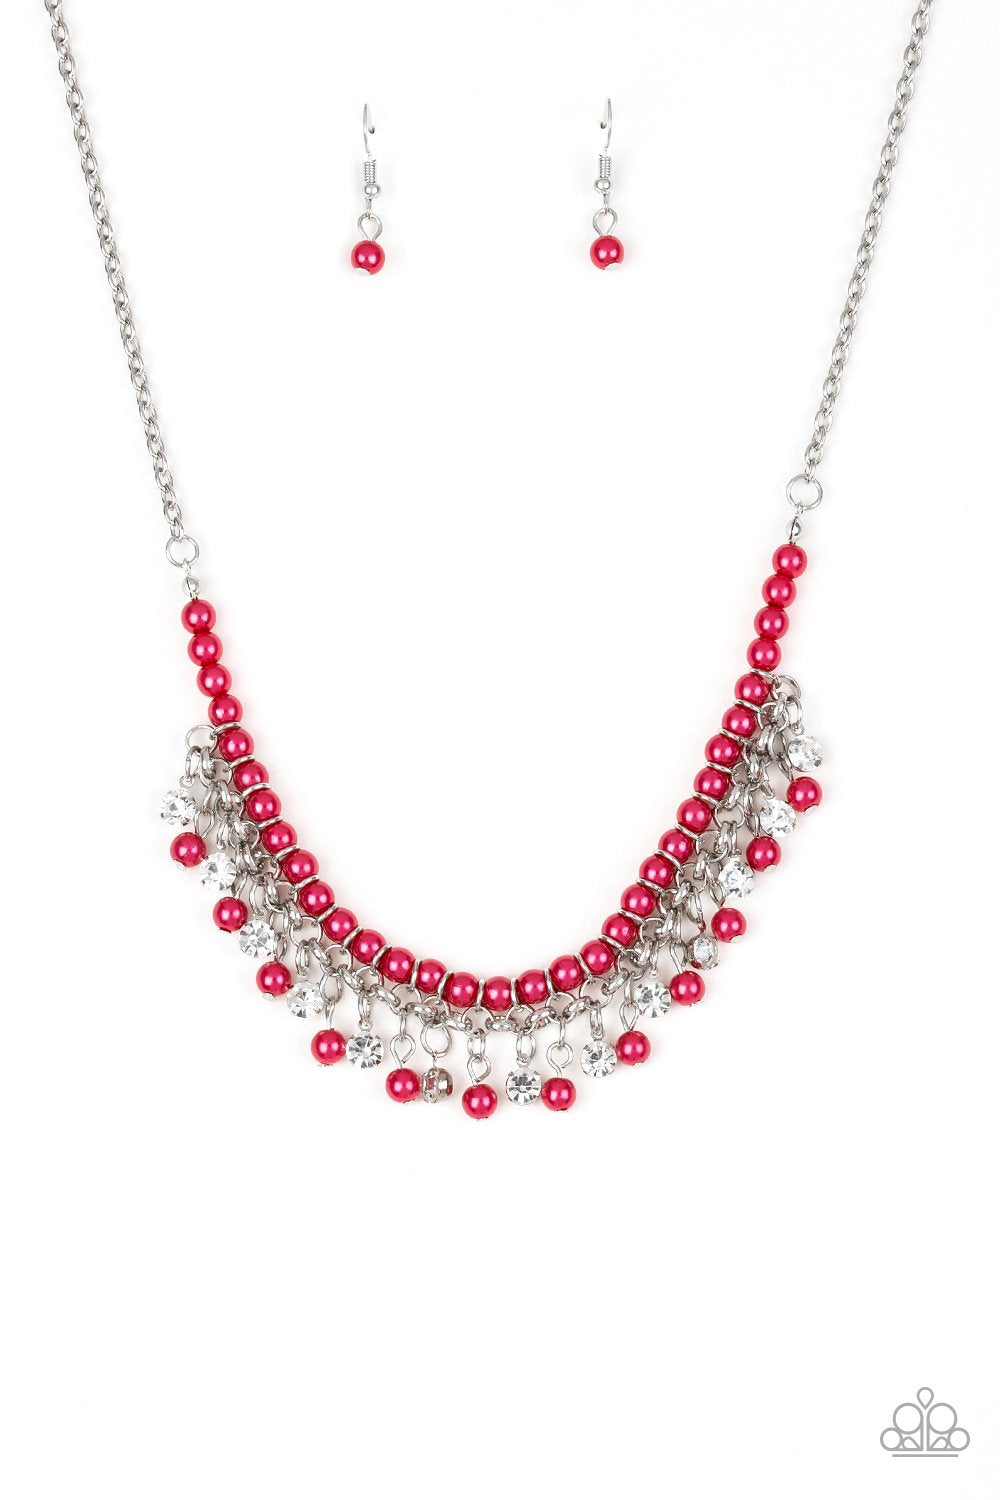 A TOUCH OF CLASSY - PINK Necklace